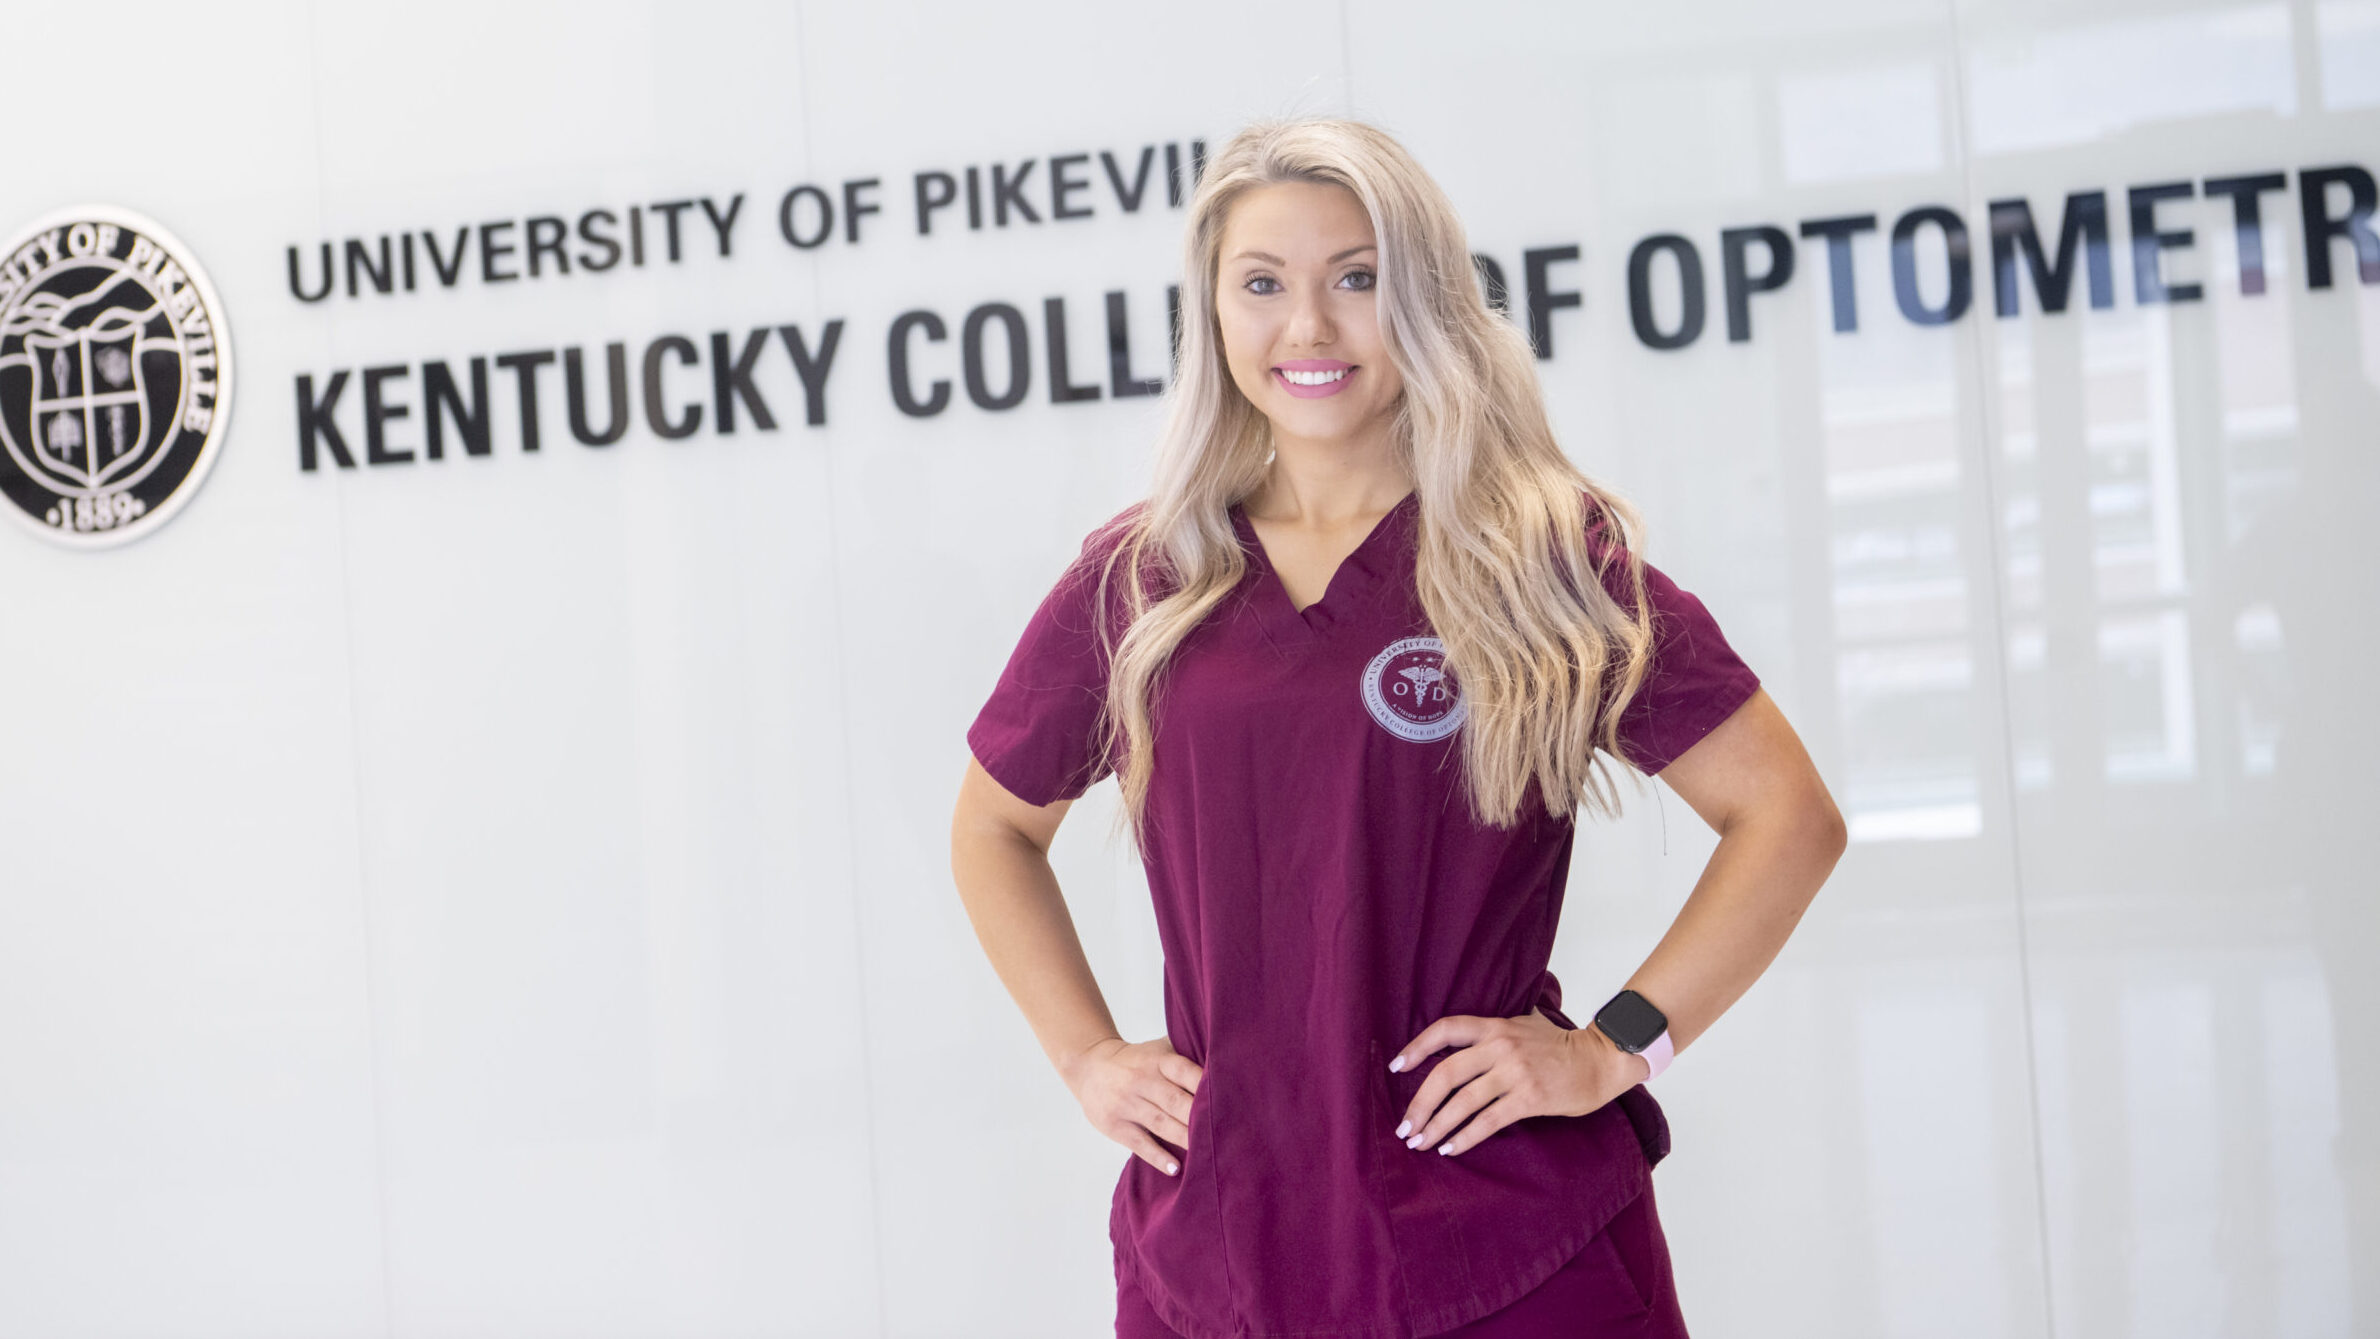 KYCO graduate helping students gain clinical experience